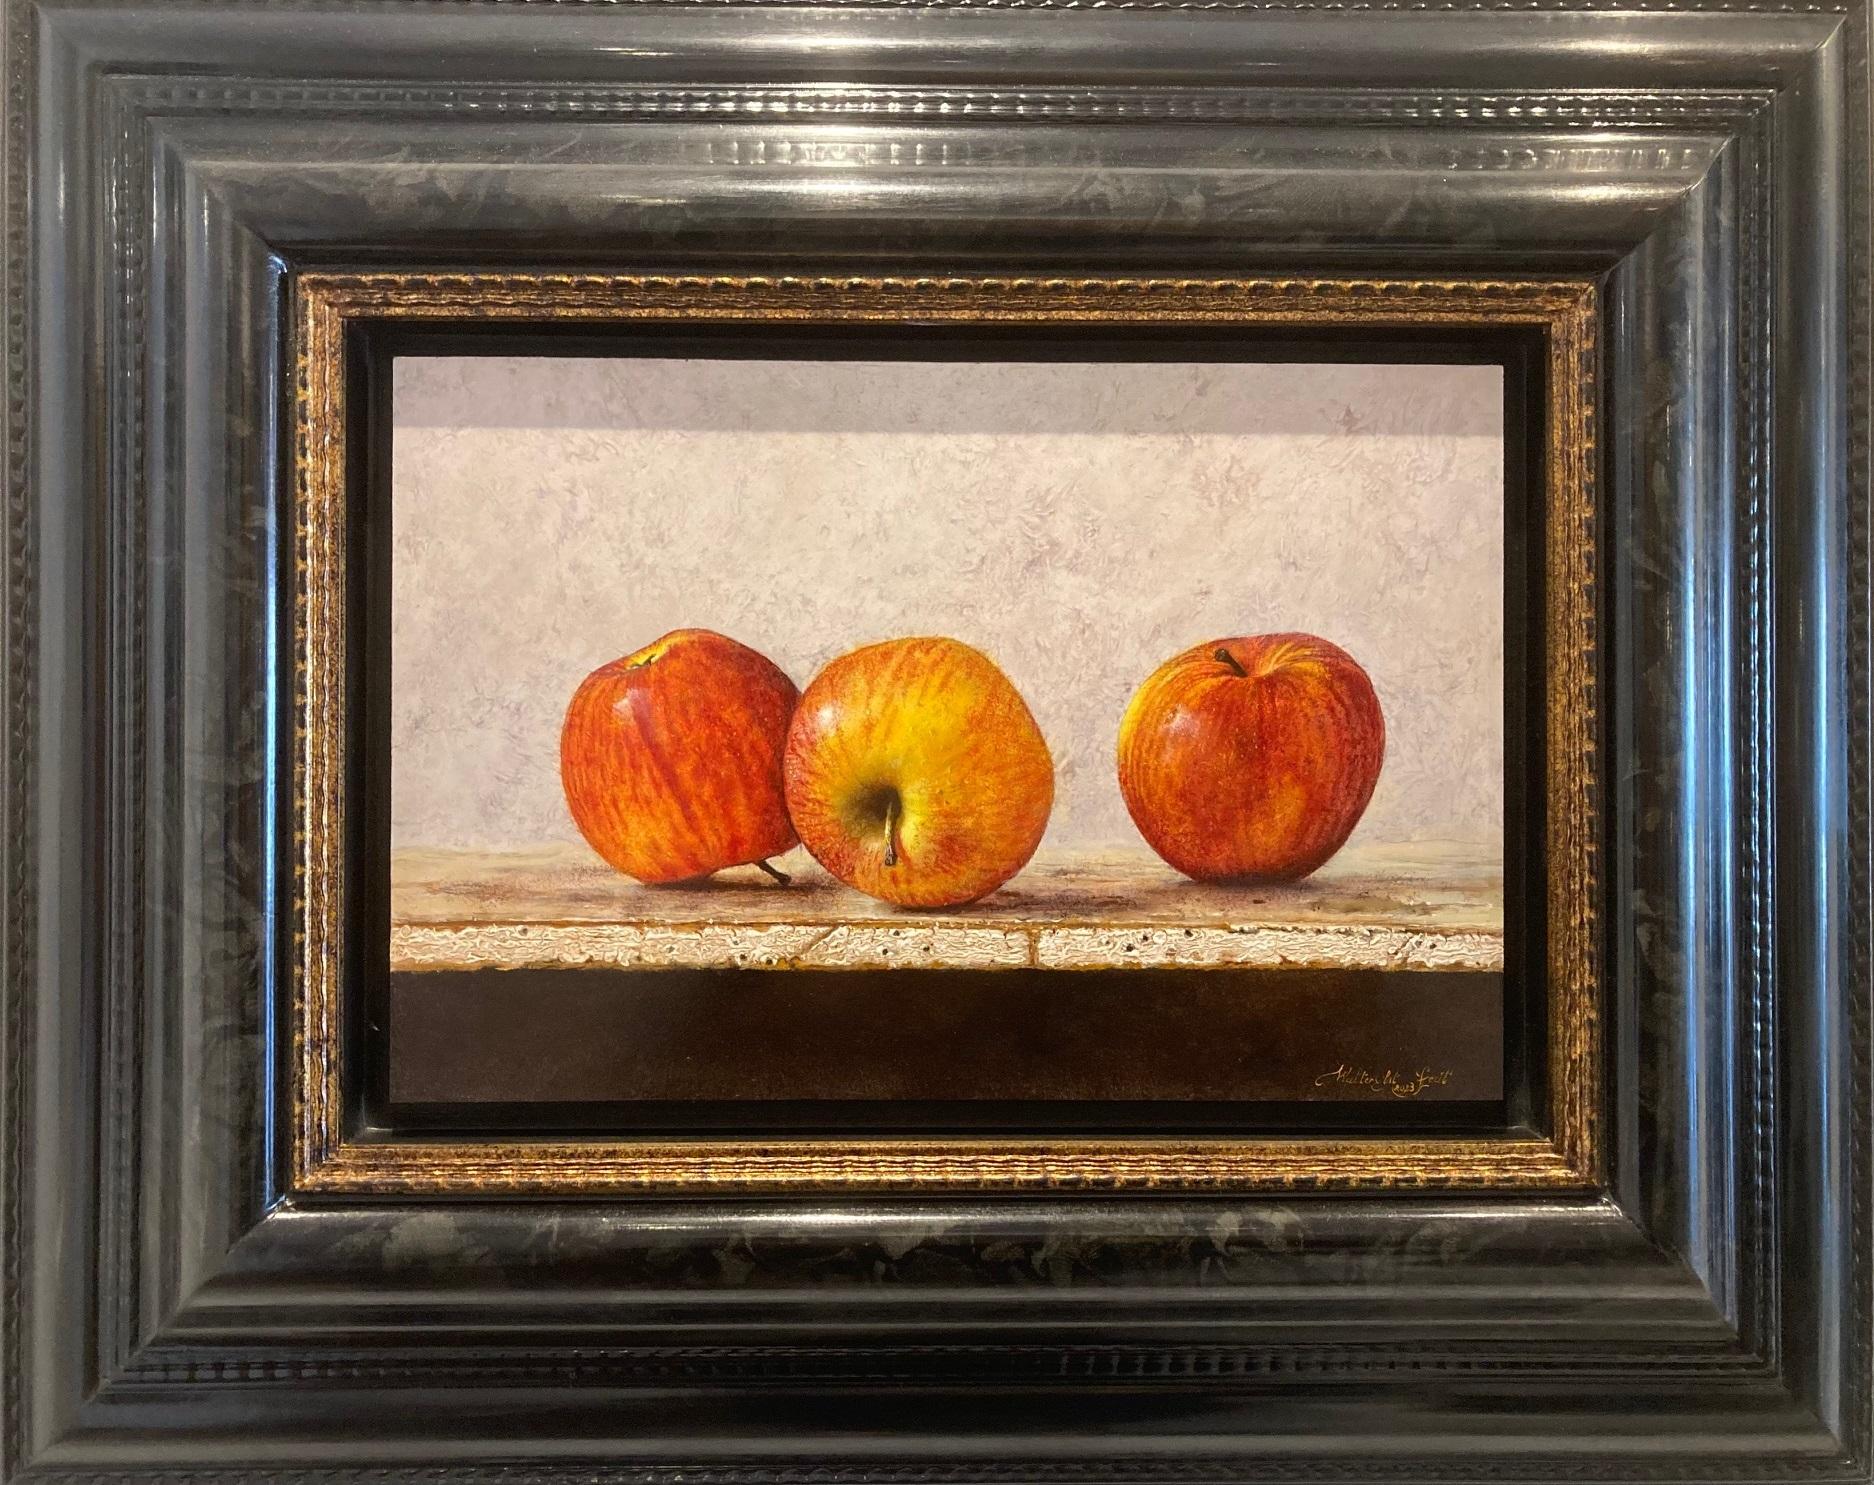 Royal Gala Still Life Painting Oil on Panel Fruit In Stock 